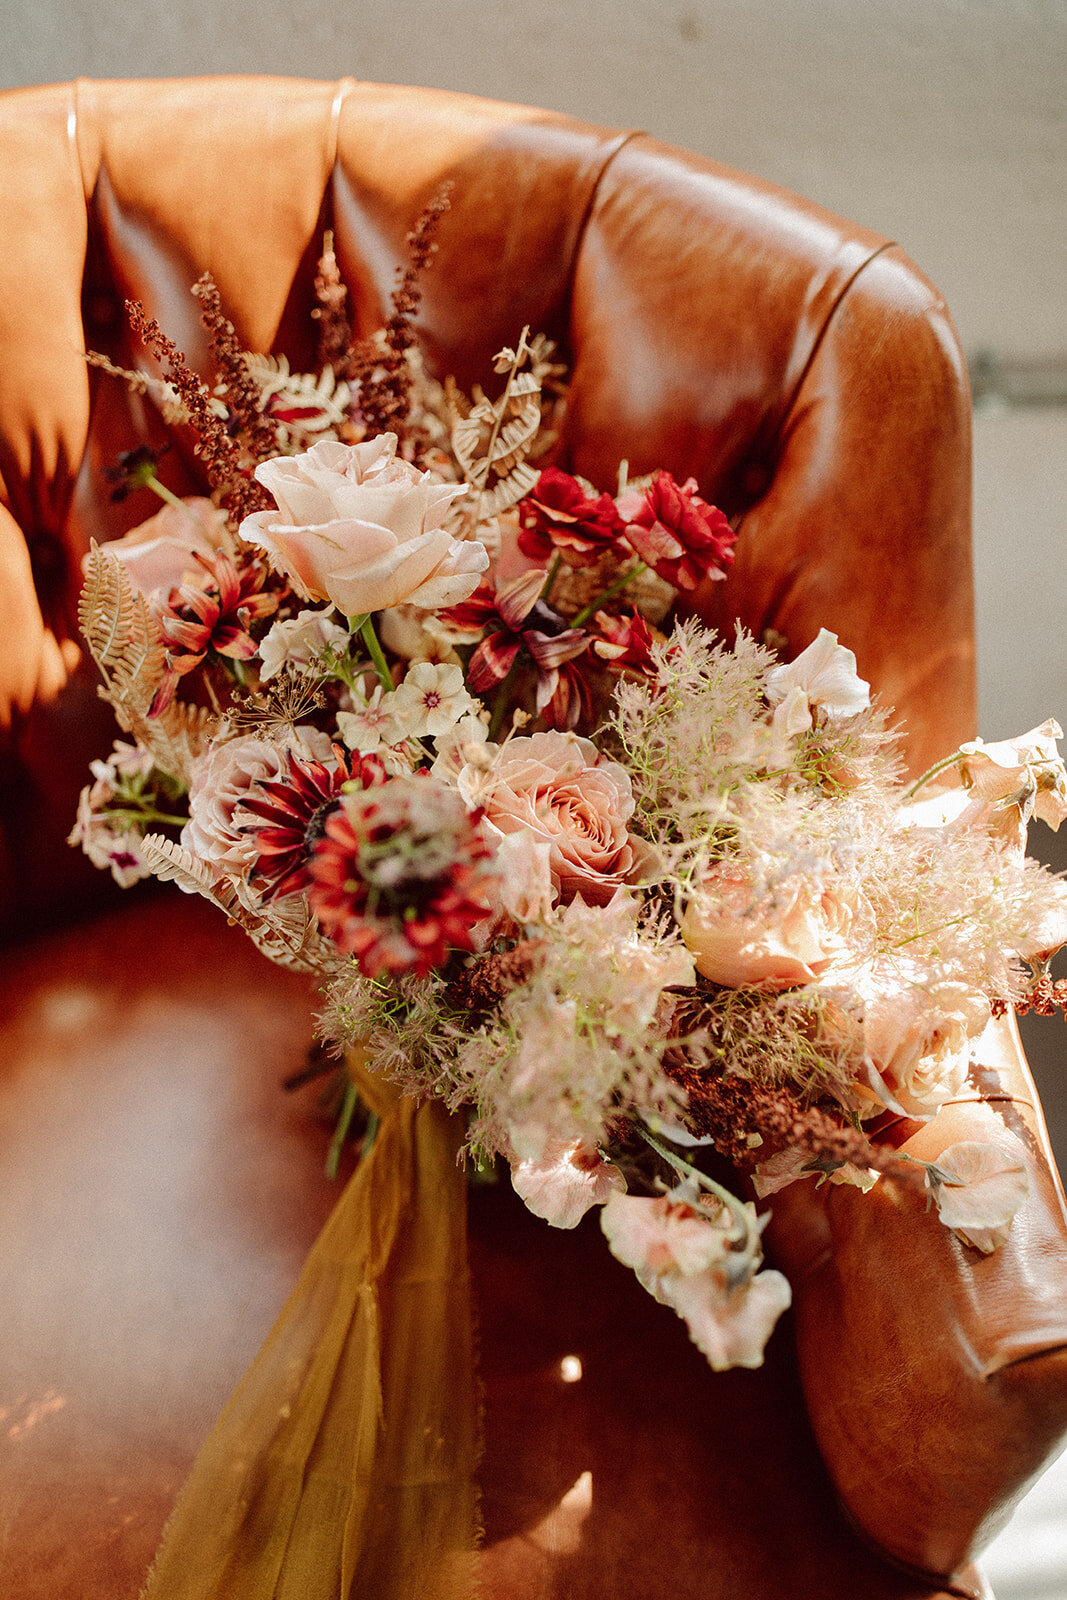 Arrangement of cream, blush and wine-colored flowers atop a leather chair.